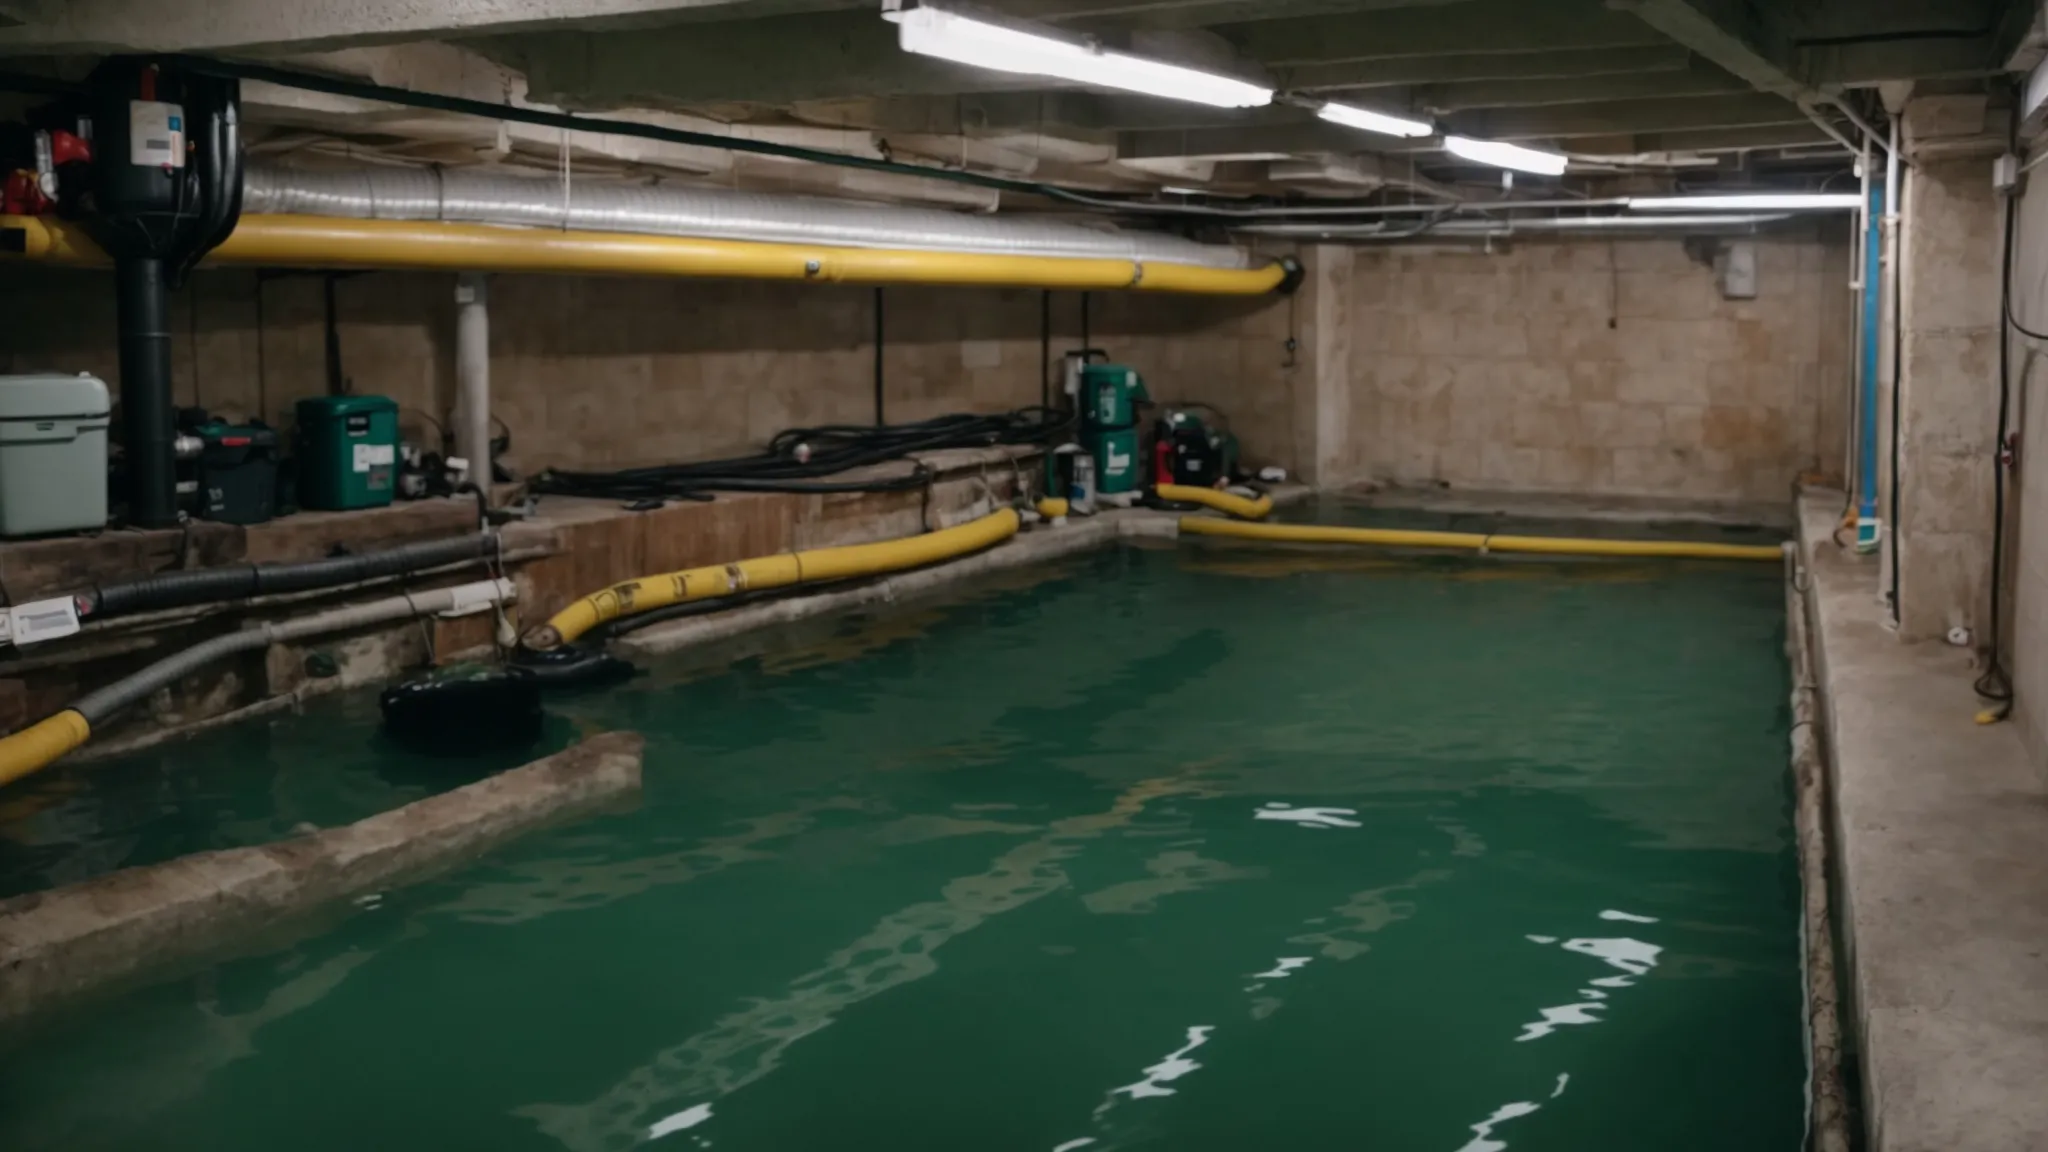 a well-organized basement with a prominently placed sump pump and clear floor space suggests readiness against potential flooding.